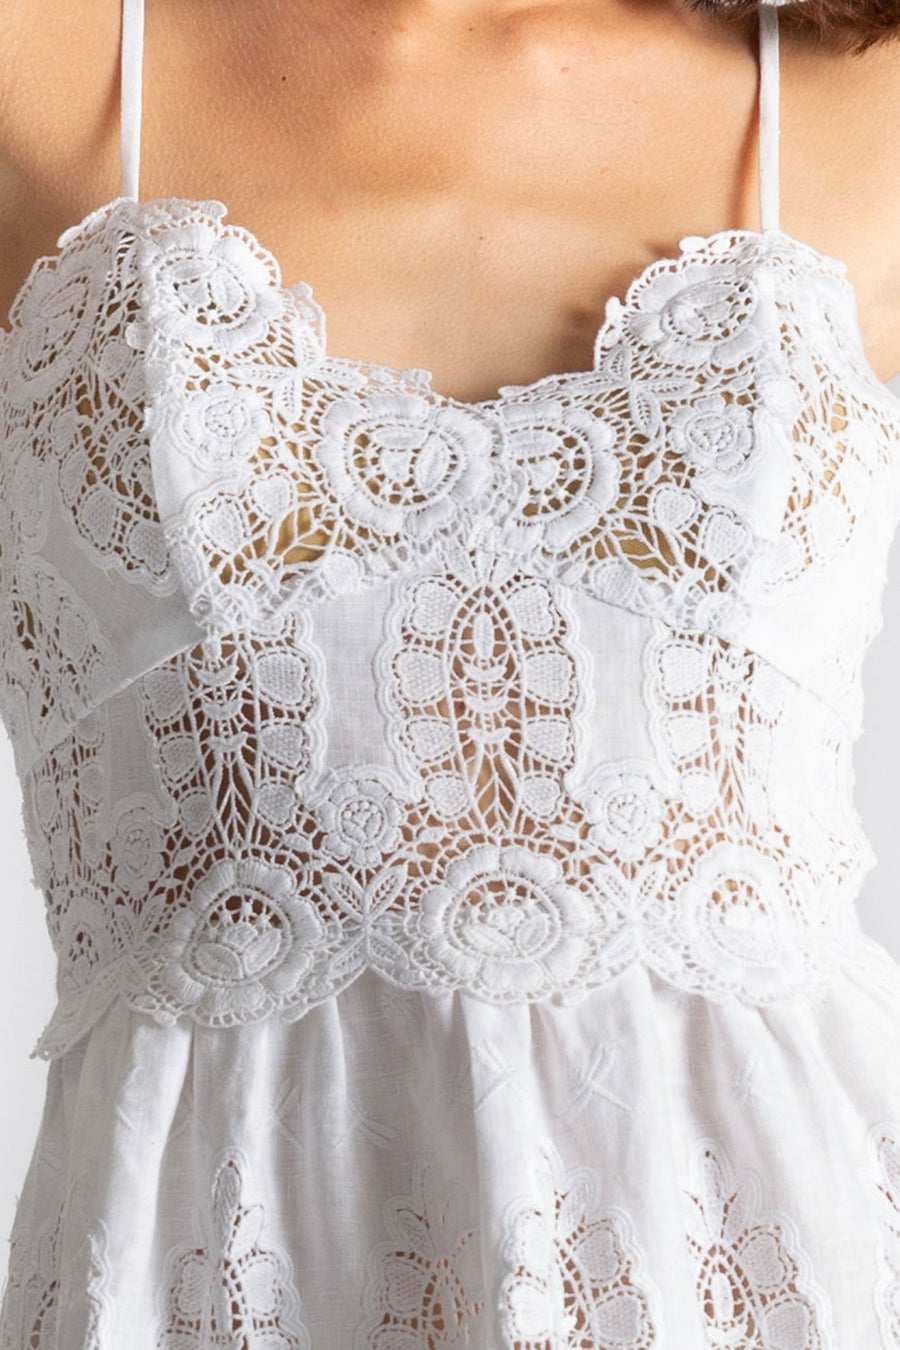 This is a detail photo of the top of a white linen and lace dress with a sweetheart neckline. The lace details show flowers and dragonflies.